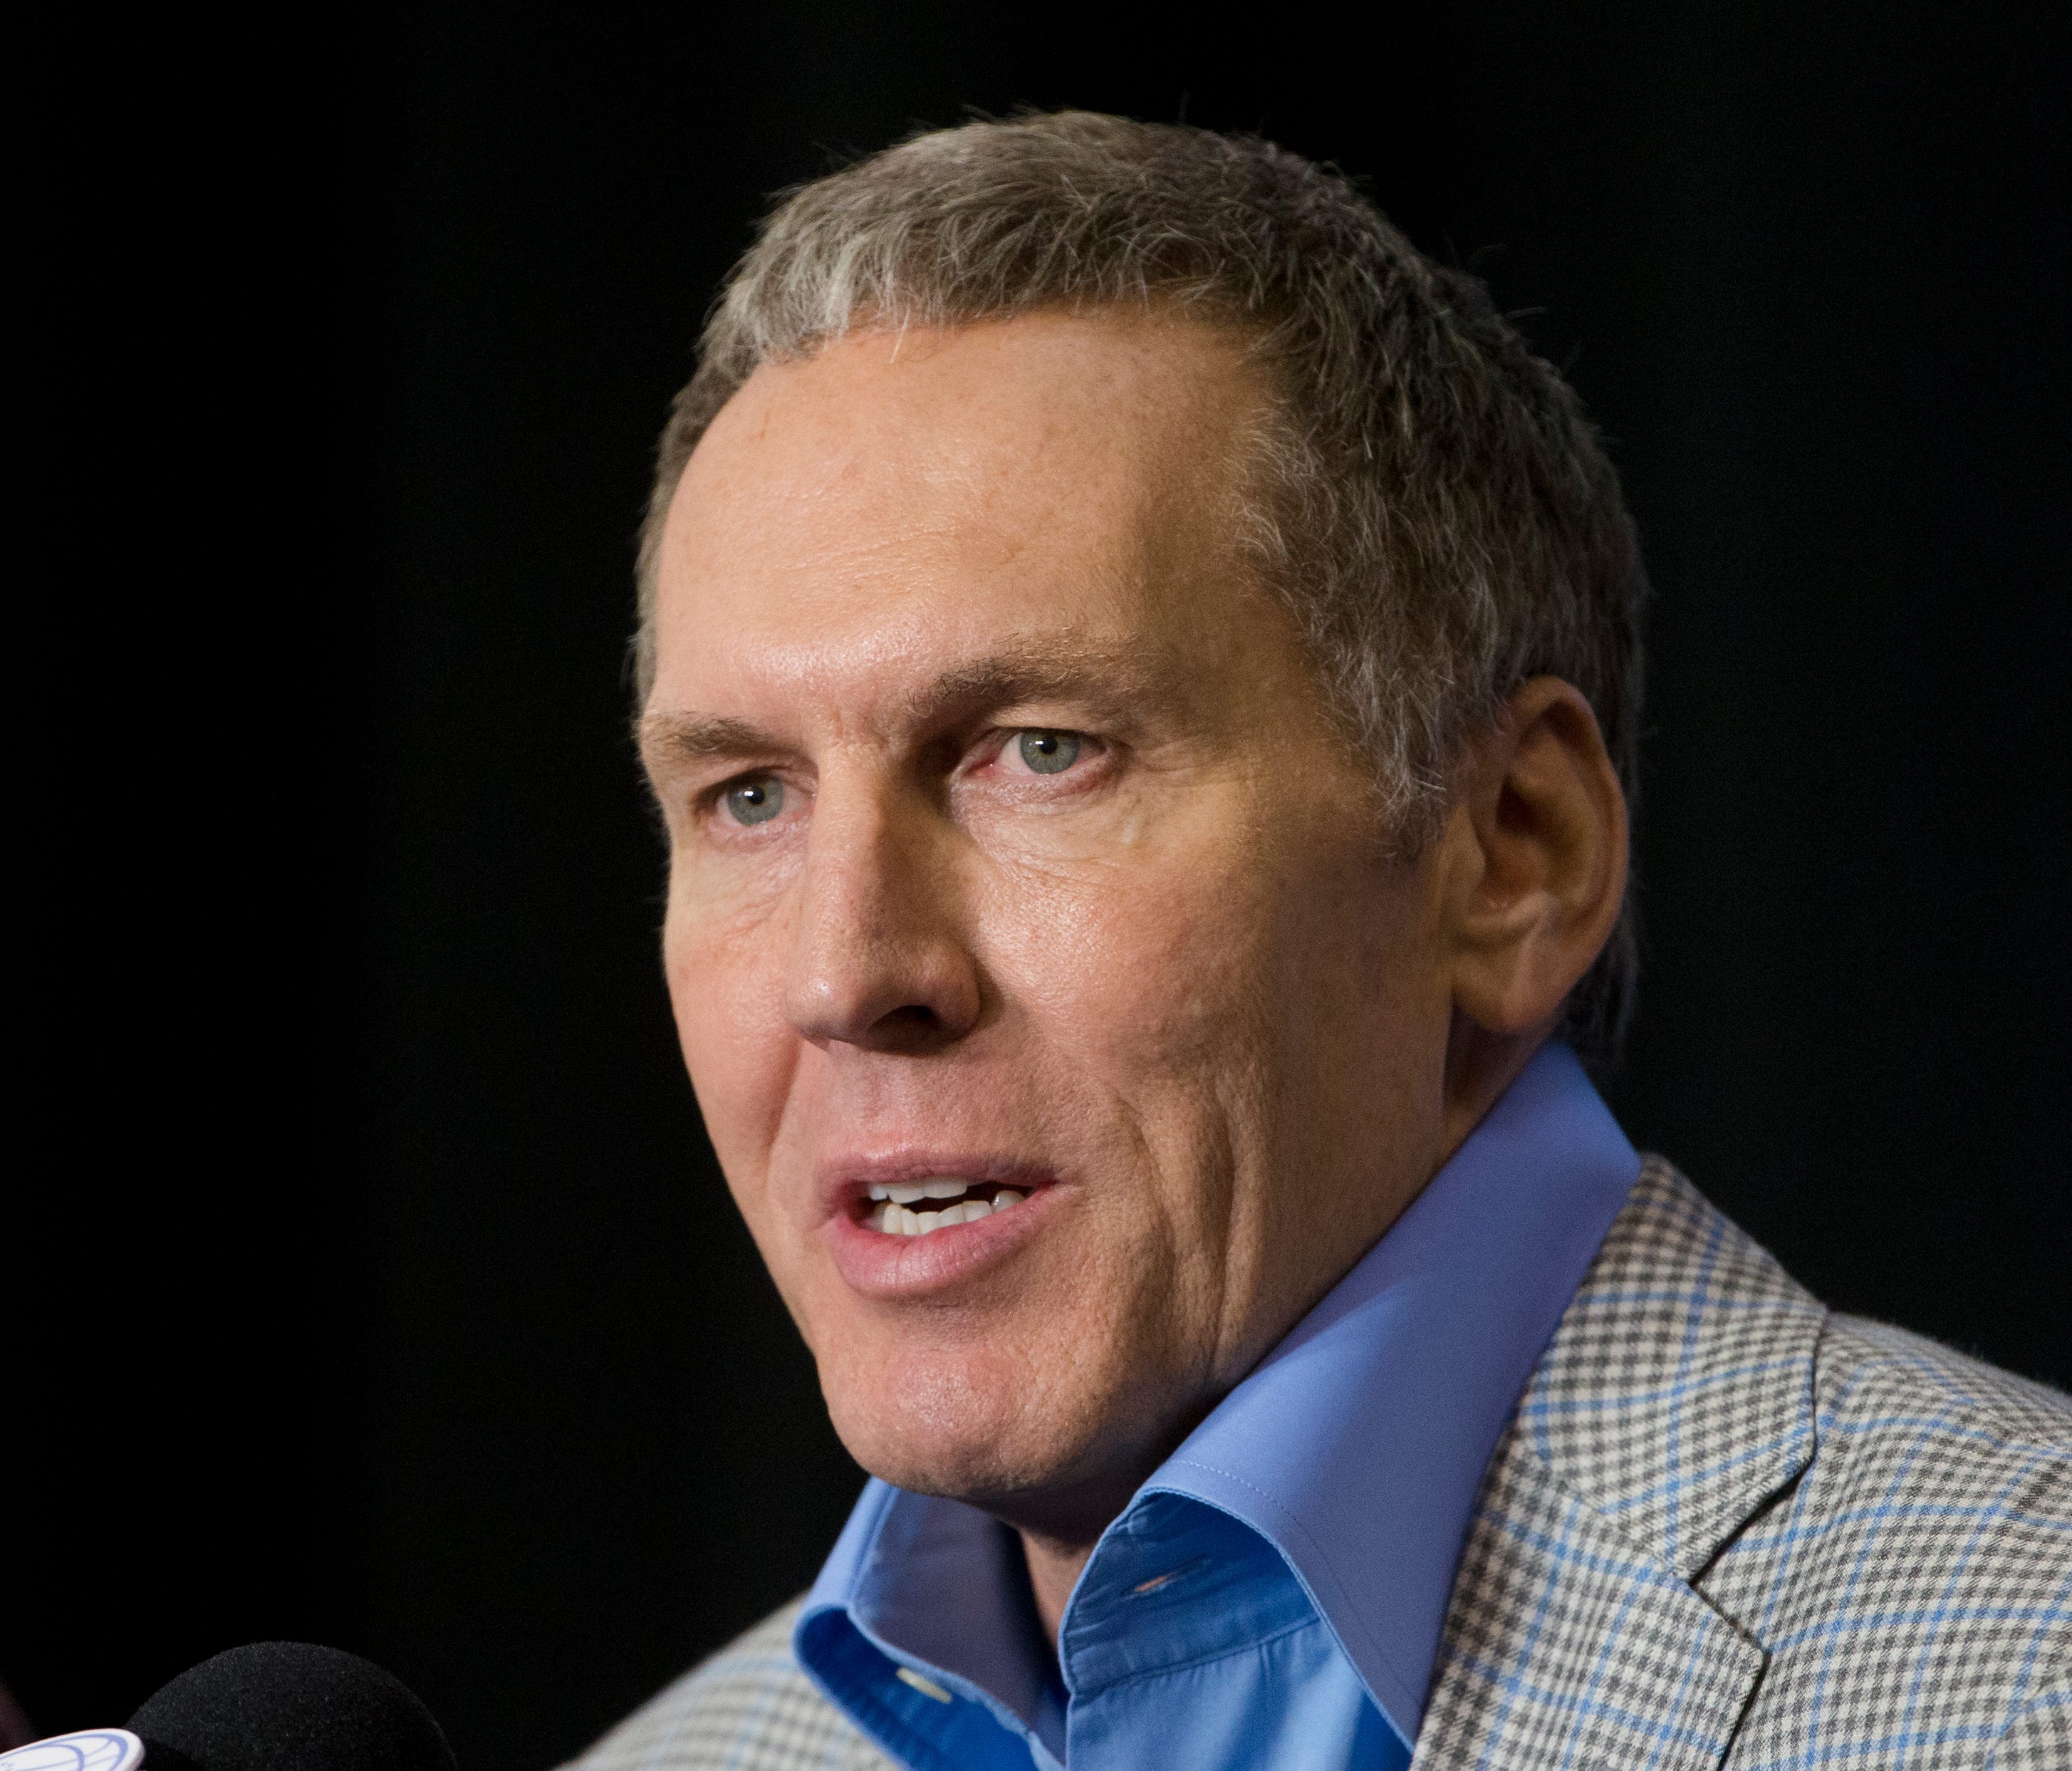 Philadelphia 76ers President of Basketball Operations Bryan Colangelo speaking during a news conference in Philadelphia.